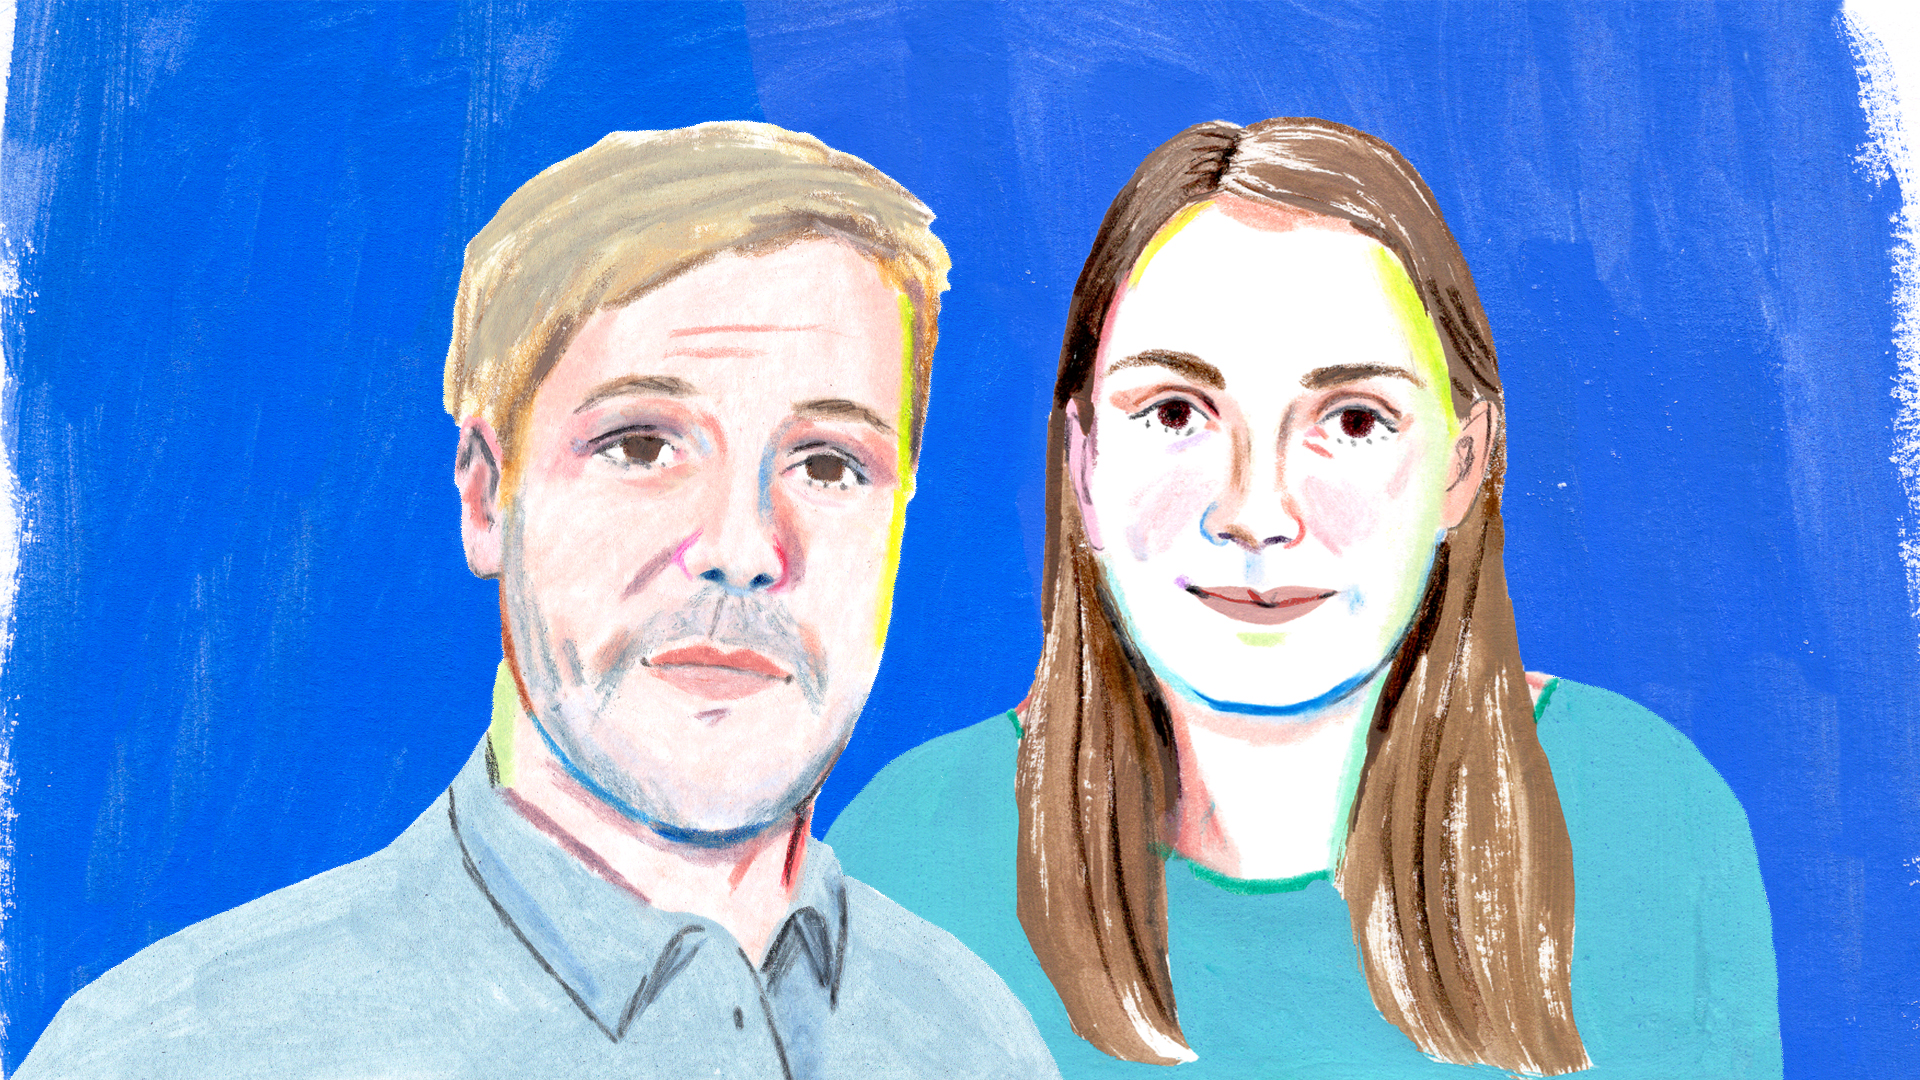 An illustration of a man and a woman, Jack Rafferty and Lucia Coulter.